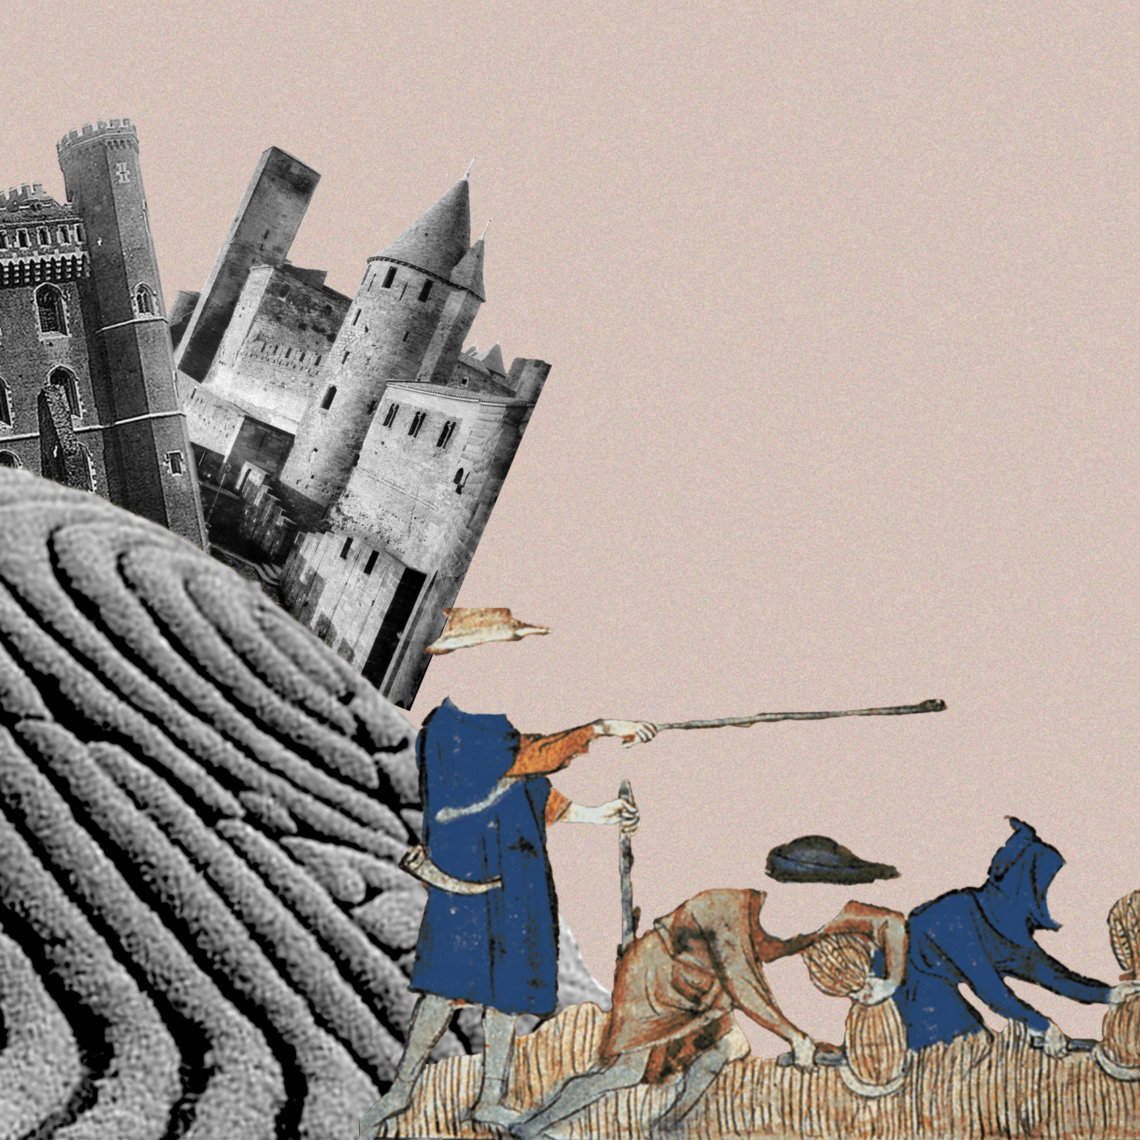 Scene on Radio Ep. 2 cover art, collage of medieval castle and peasants working in a field